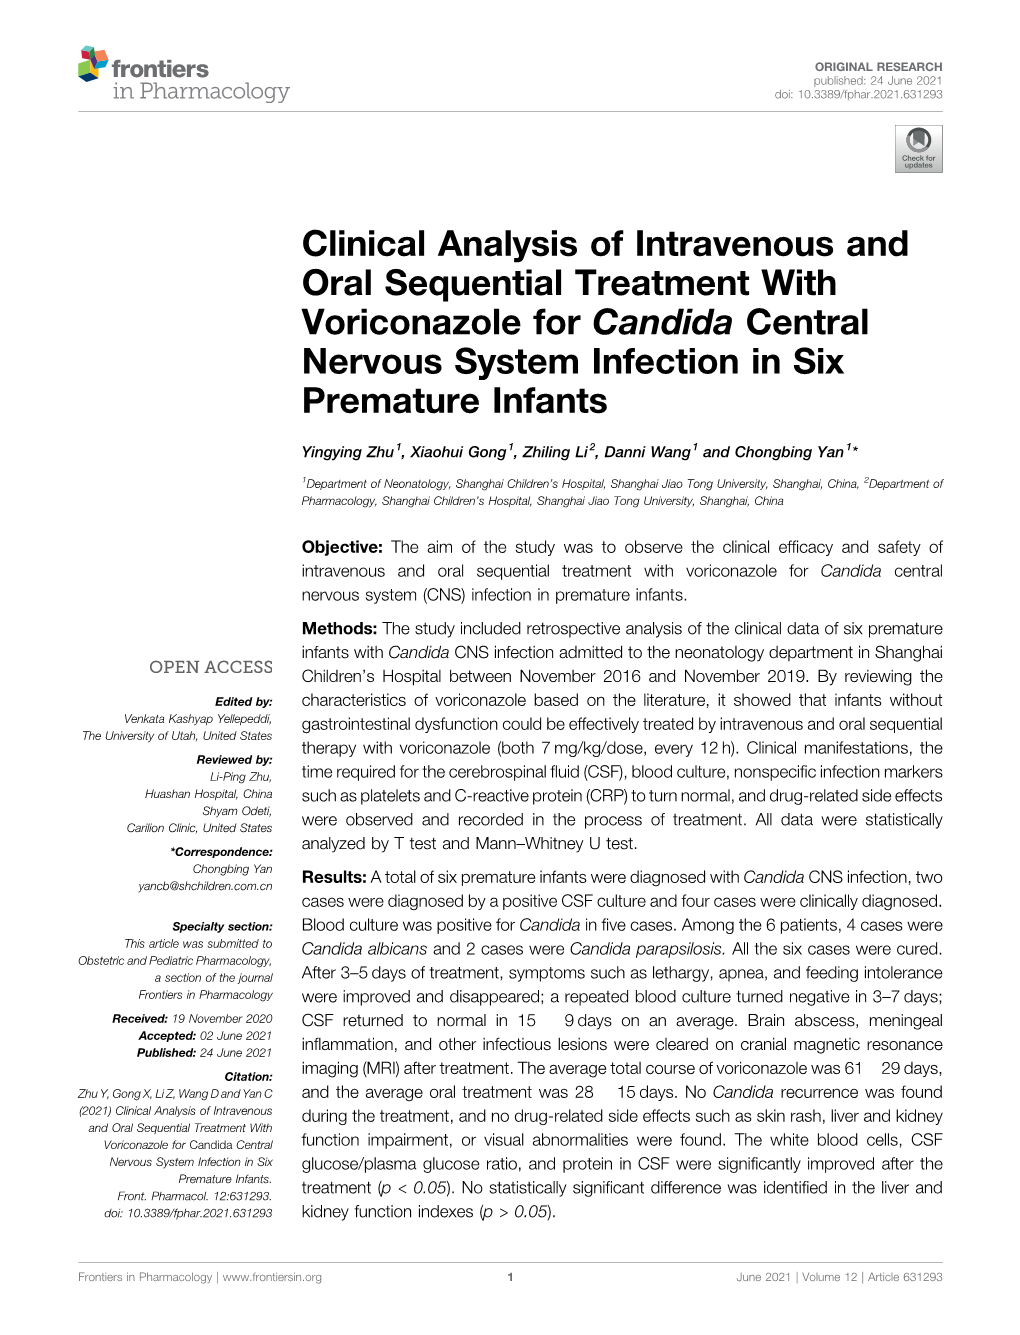 Clinical Analysis of Intravenous and Oral Sequential Treatment with Voriconazole for Candida Central Nervous System Infection in Six Premature Infants